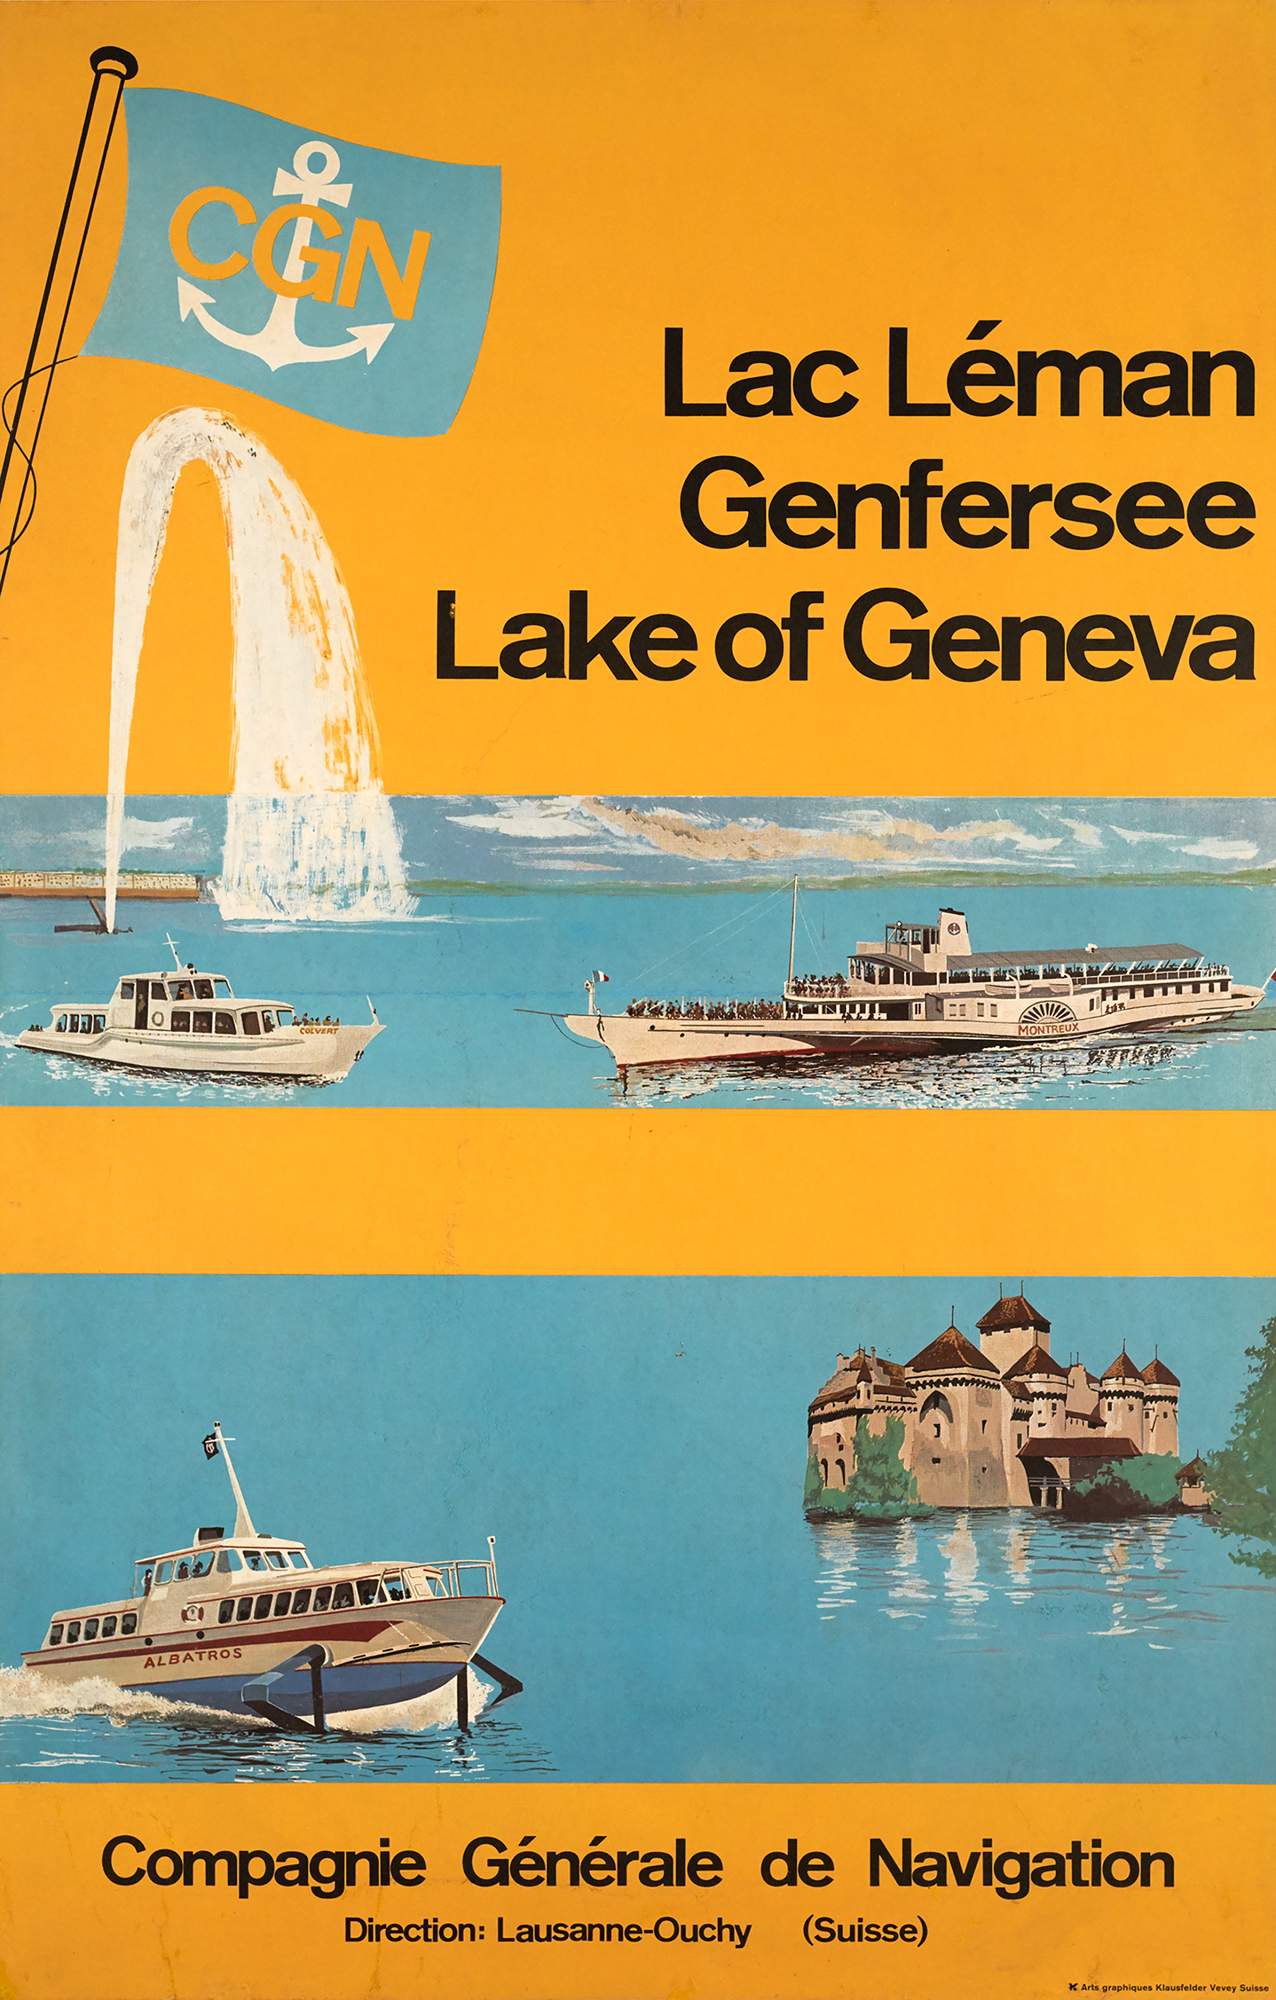 cgn-lac-leman-genfersee-lake-of-geneva-46669-cgn-affiche-ancienne.jpg